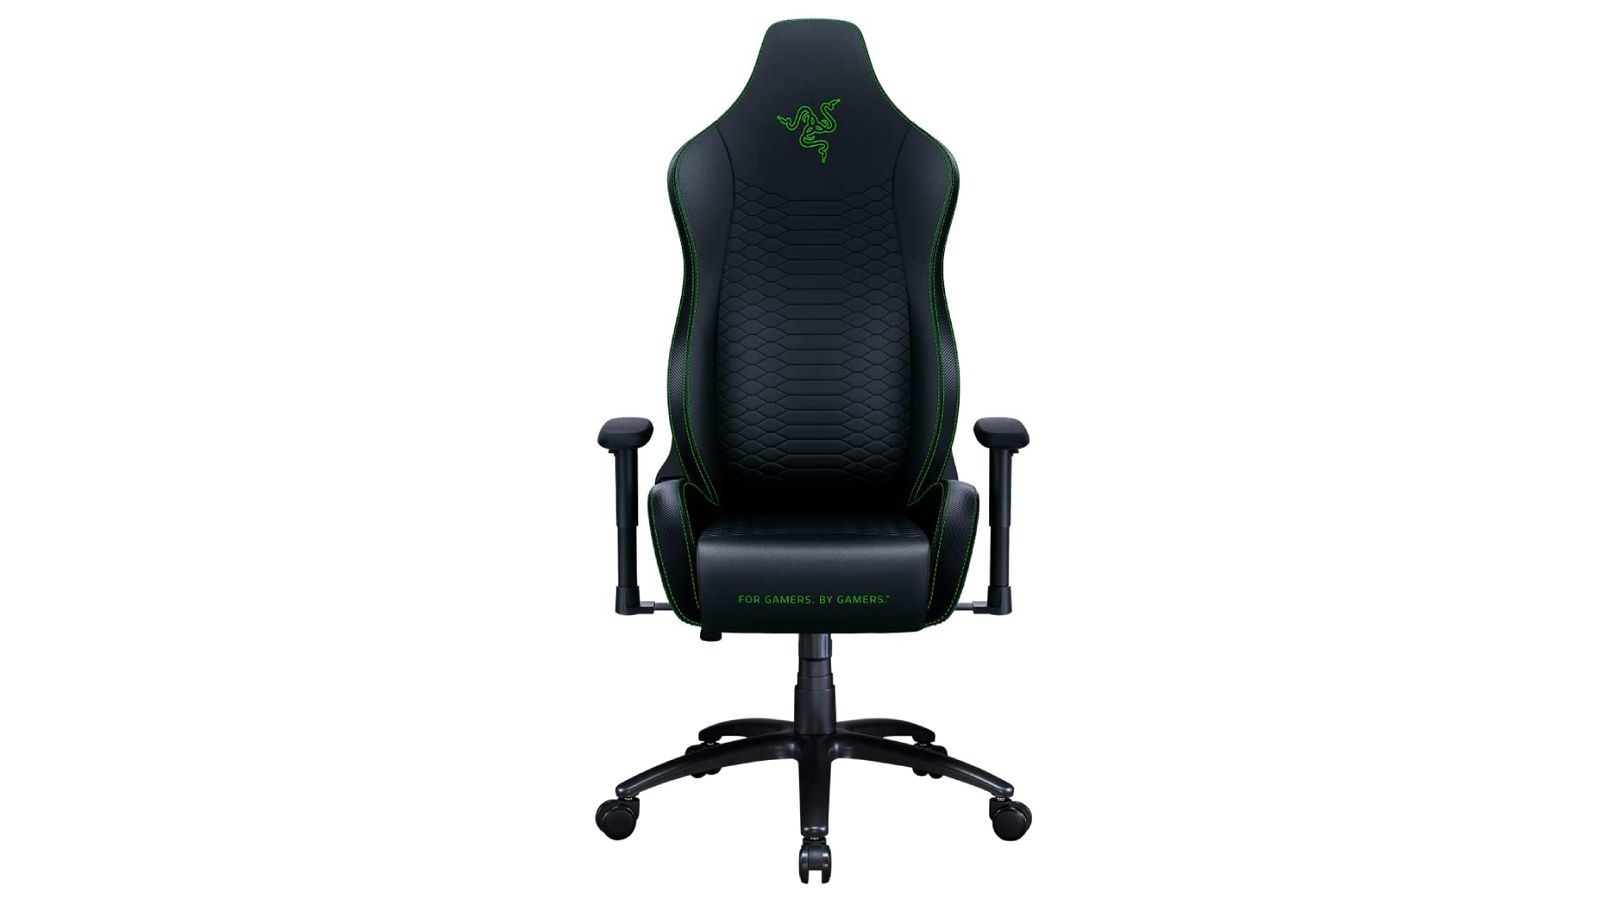 Razer Iskur product image of a black gaming chair with green details and stitching.